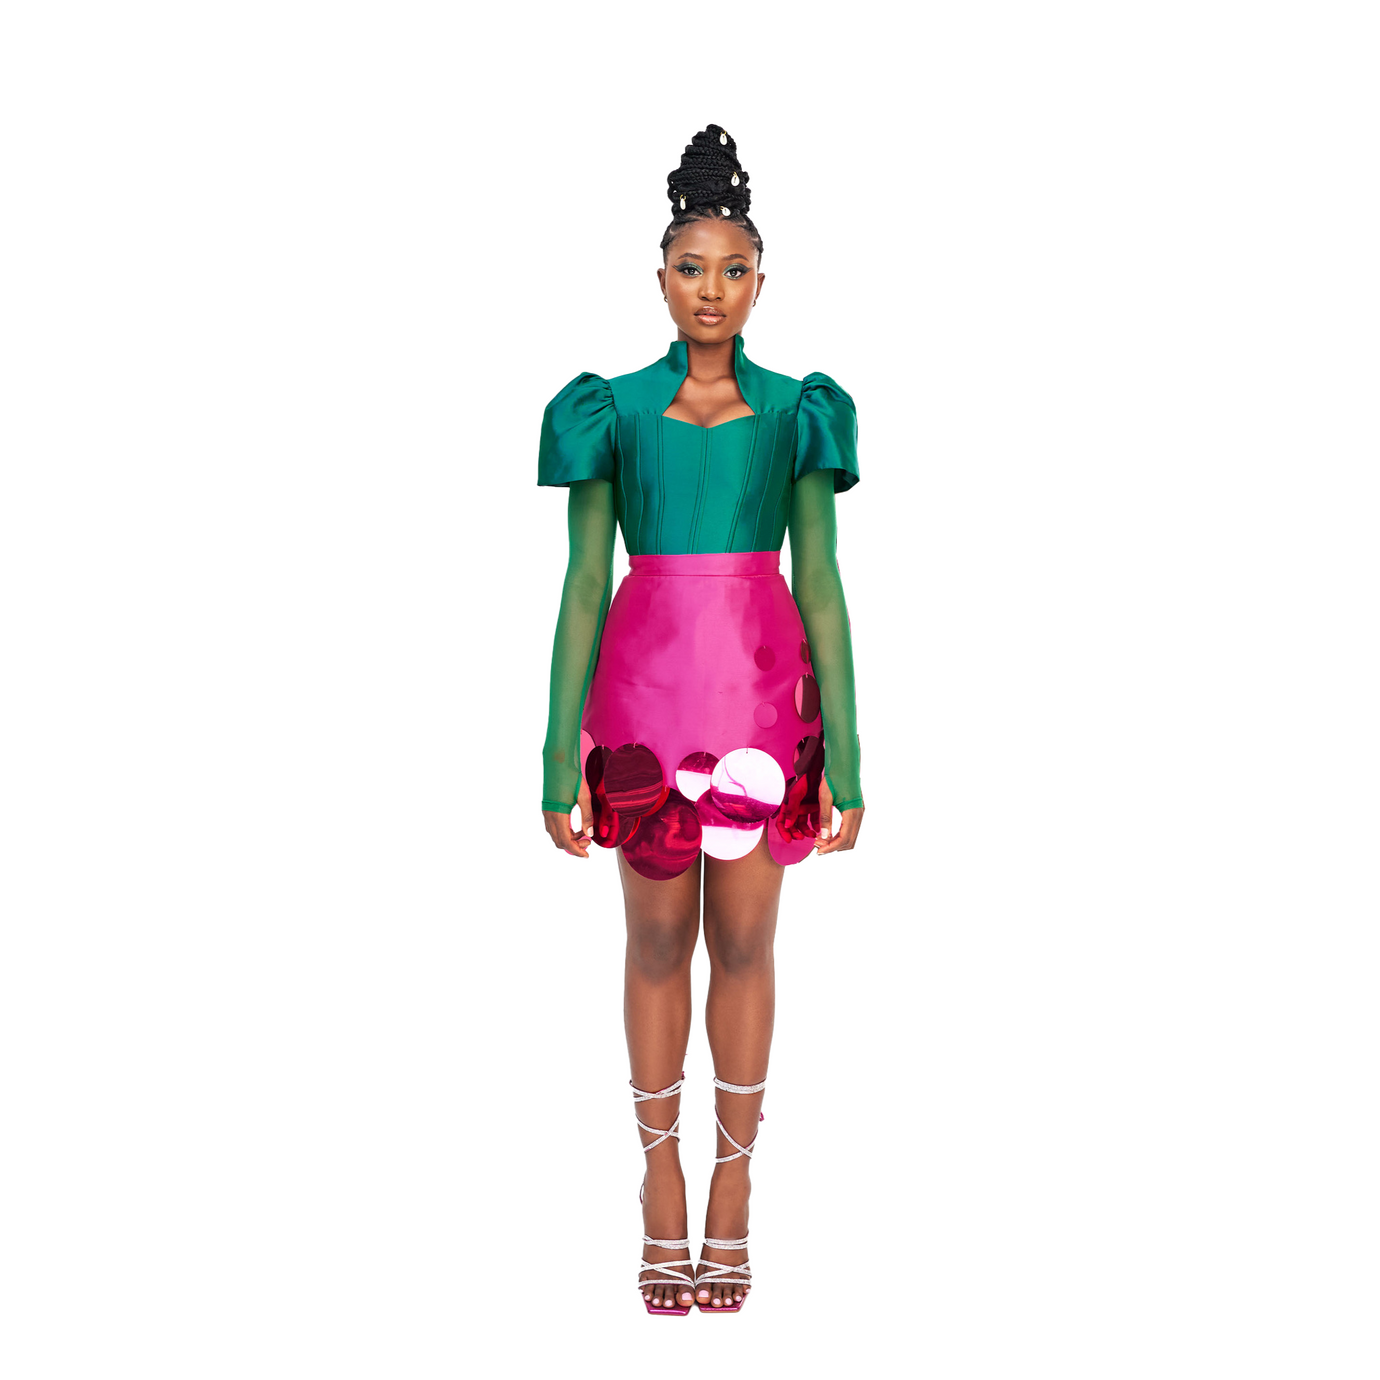 A model wearing a Green top and a Magenta Abeke skirt embellished with sequins